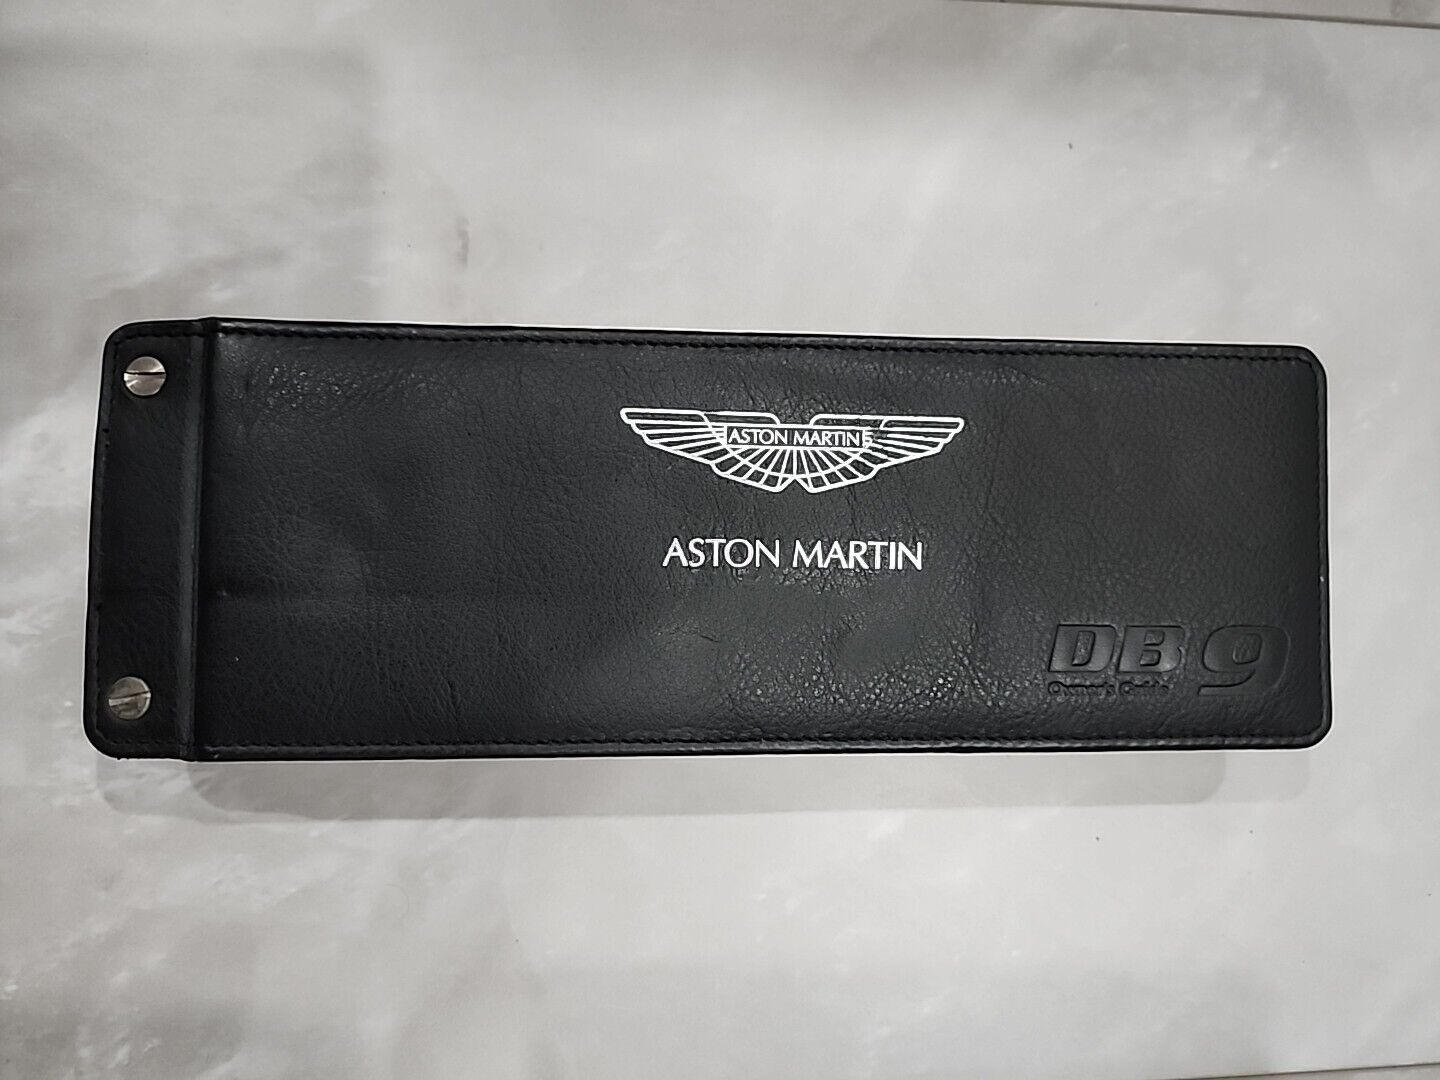 05 2005 06 2006 Aston Martin DB 9 Volante Owners Manual / Handbook  from 08/2005